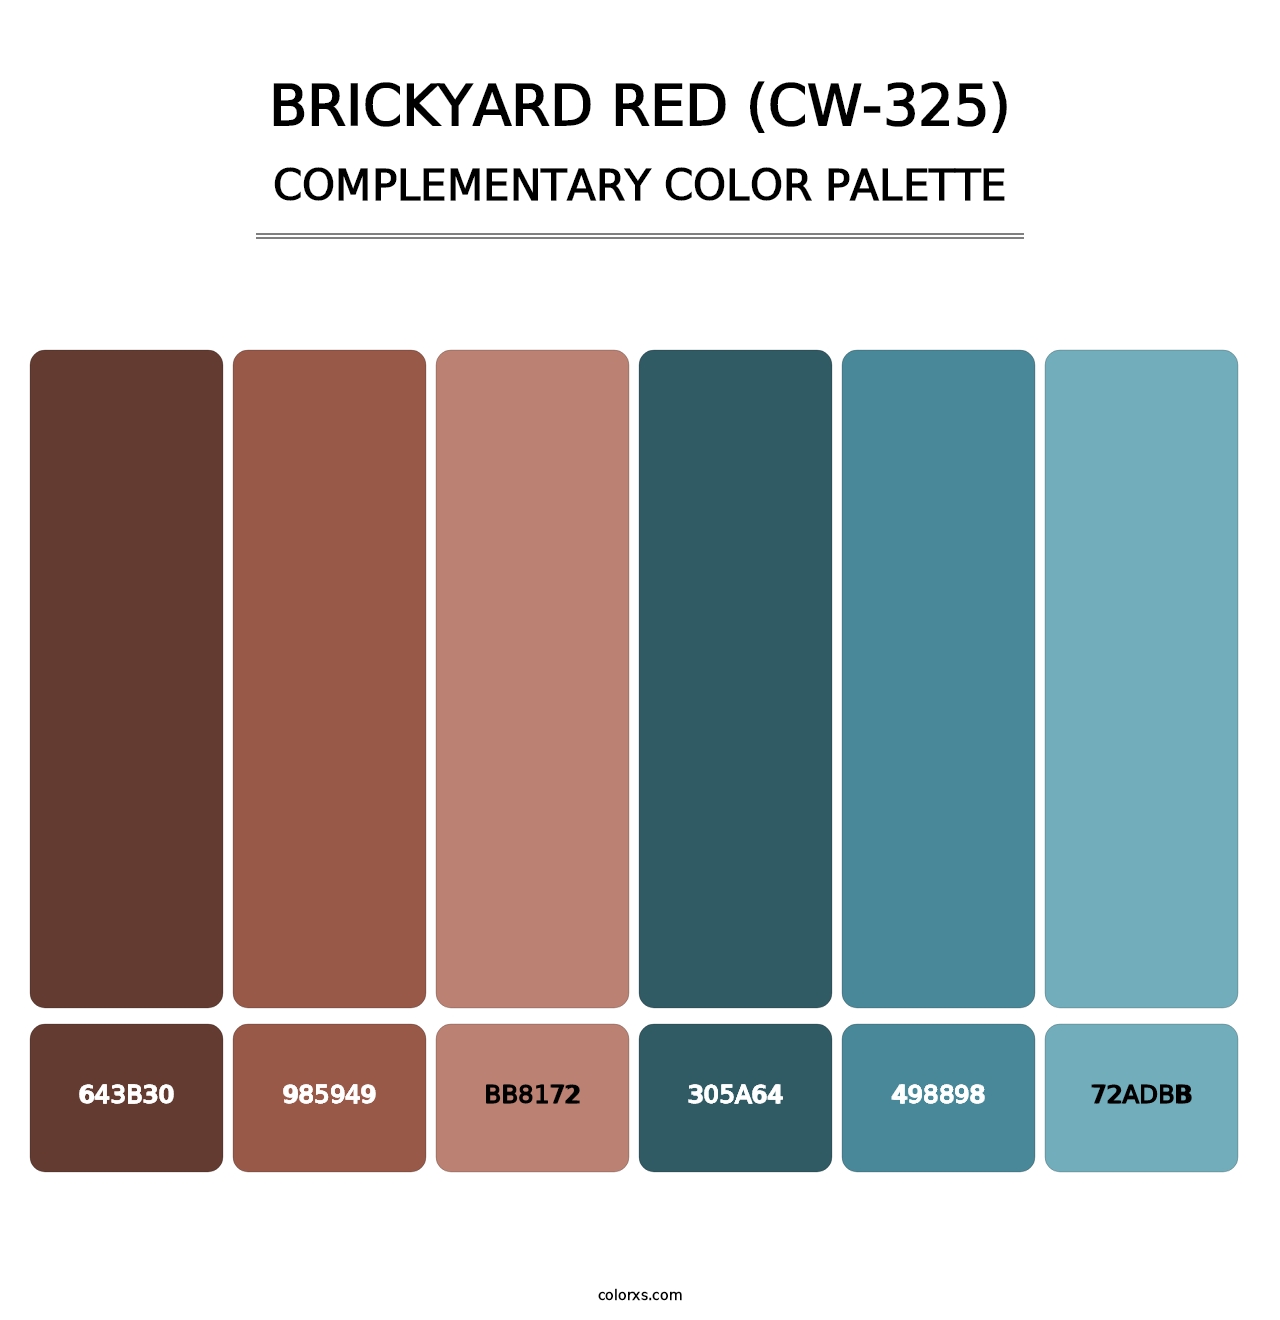 Brickyard Red (CW-325) - Complementary Color Palette